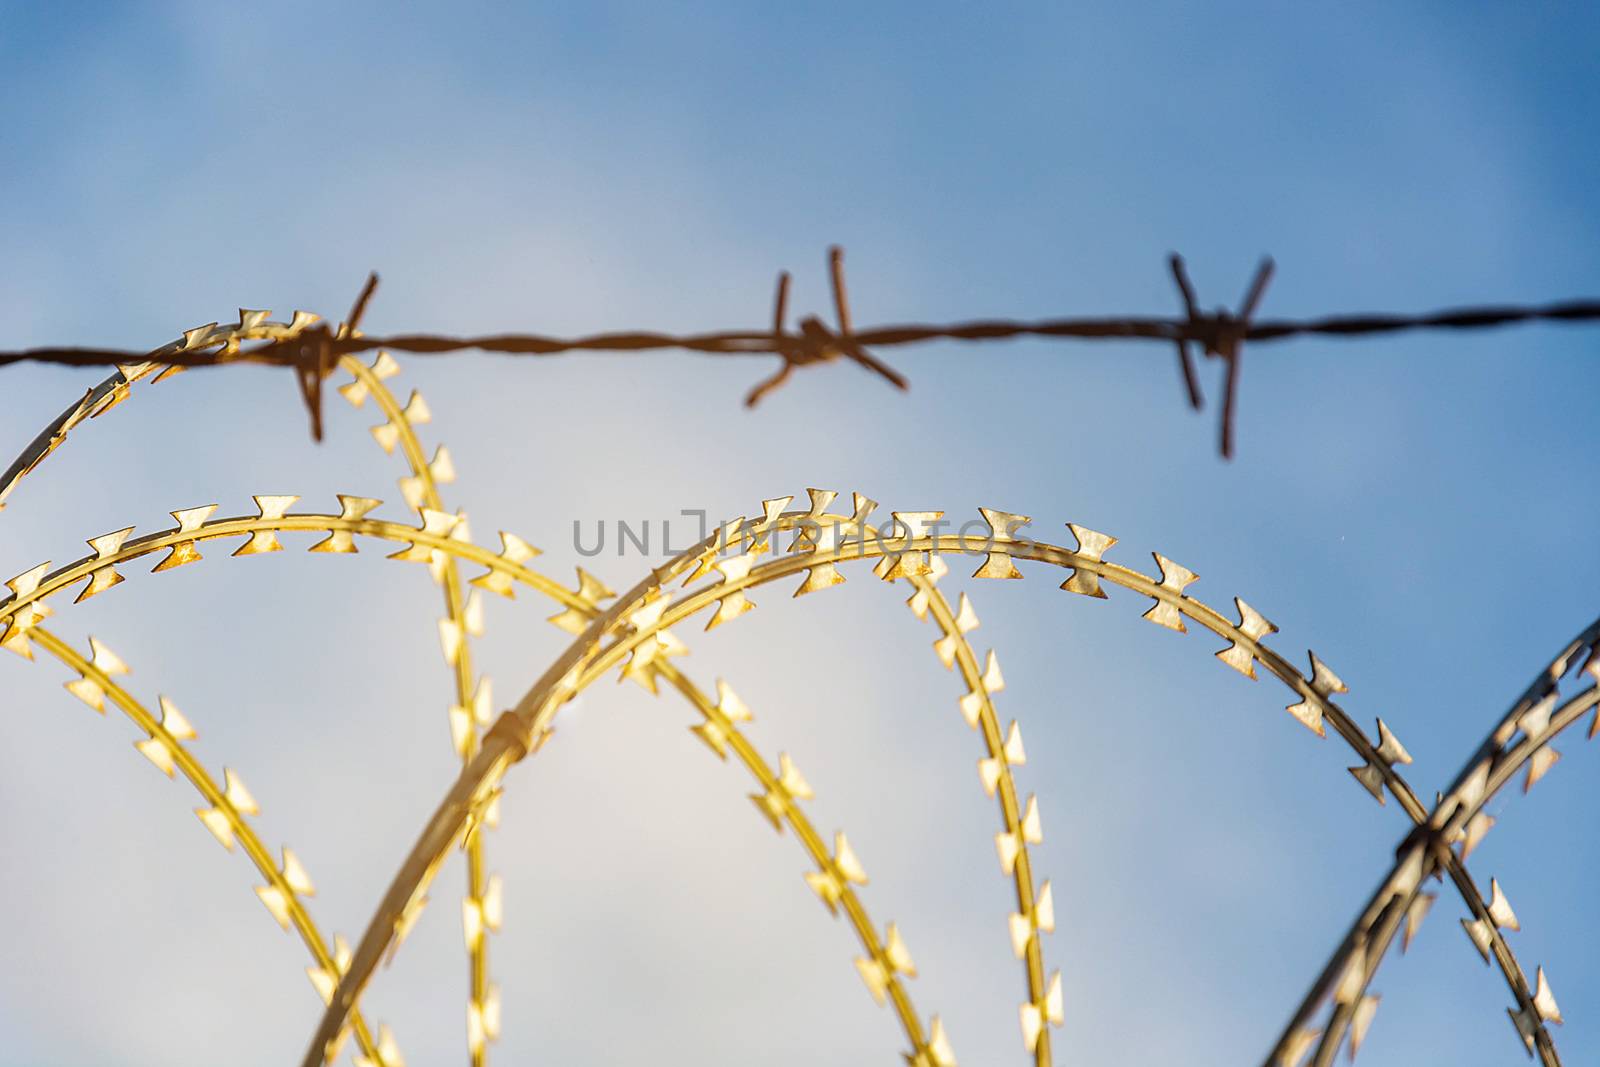 Barbed Wire Fence Used For Protection Purposes Of Property And Imprisonment, No Freedom, Barbed Wire On fence With Blue Sky To Feel Worrying.